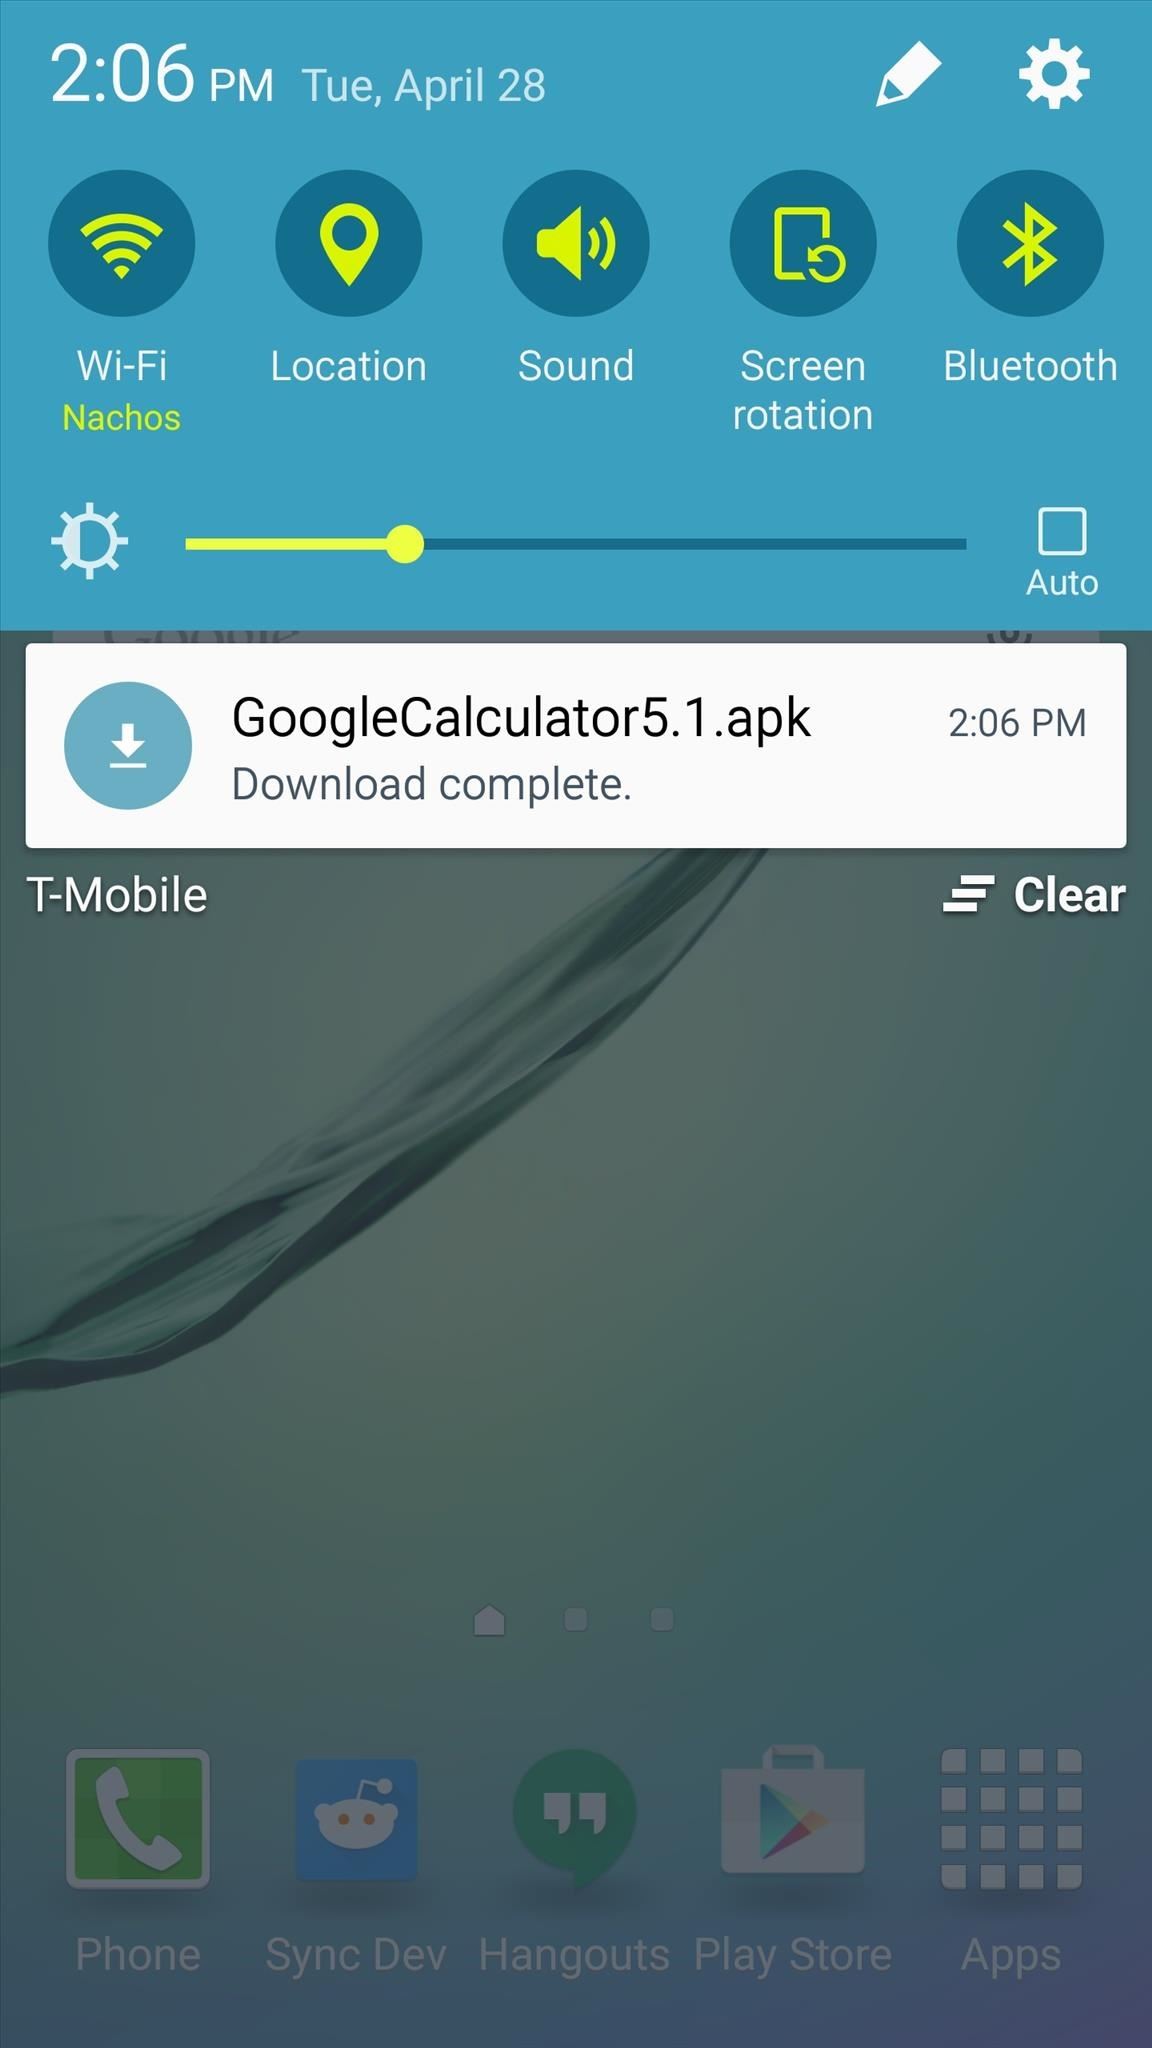 How to Install the Latest Google Clock & Calculator Apps on Your Galaxy S6 (Or Other Android)